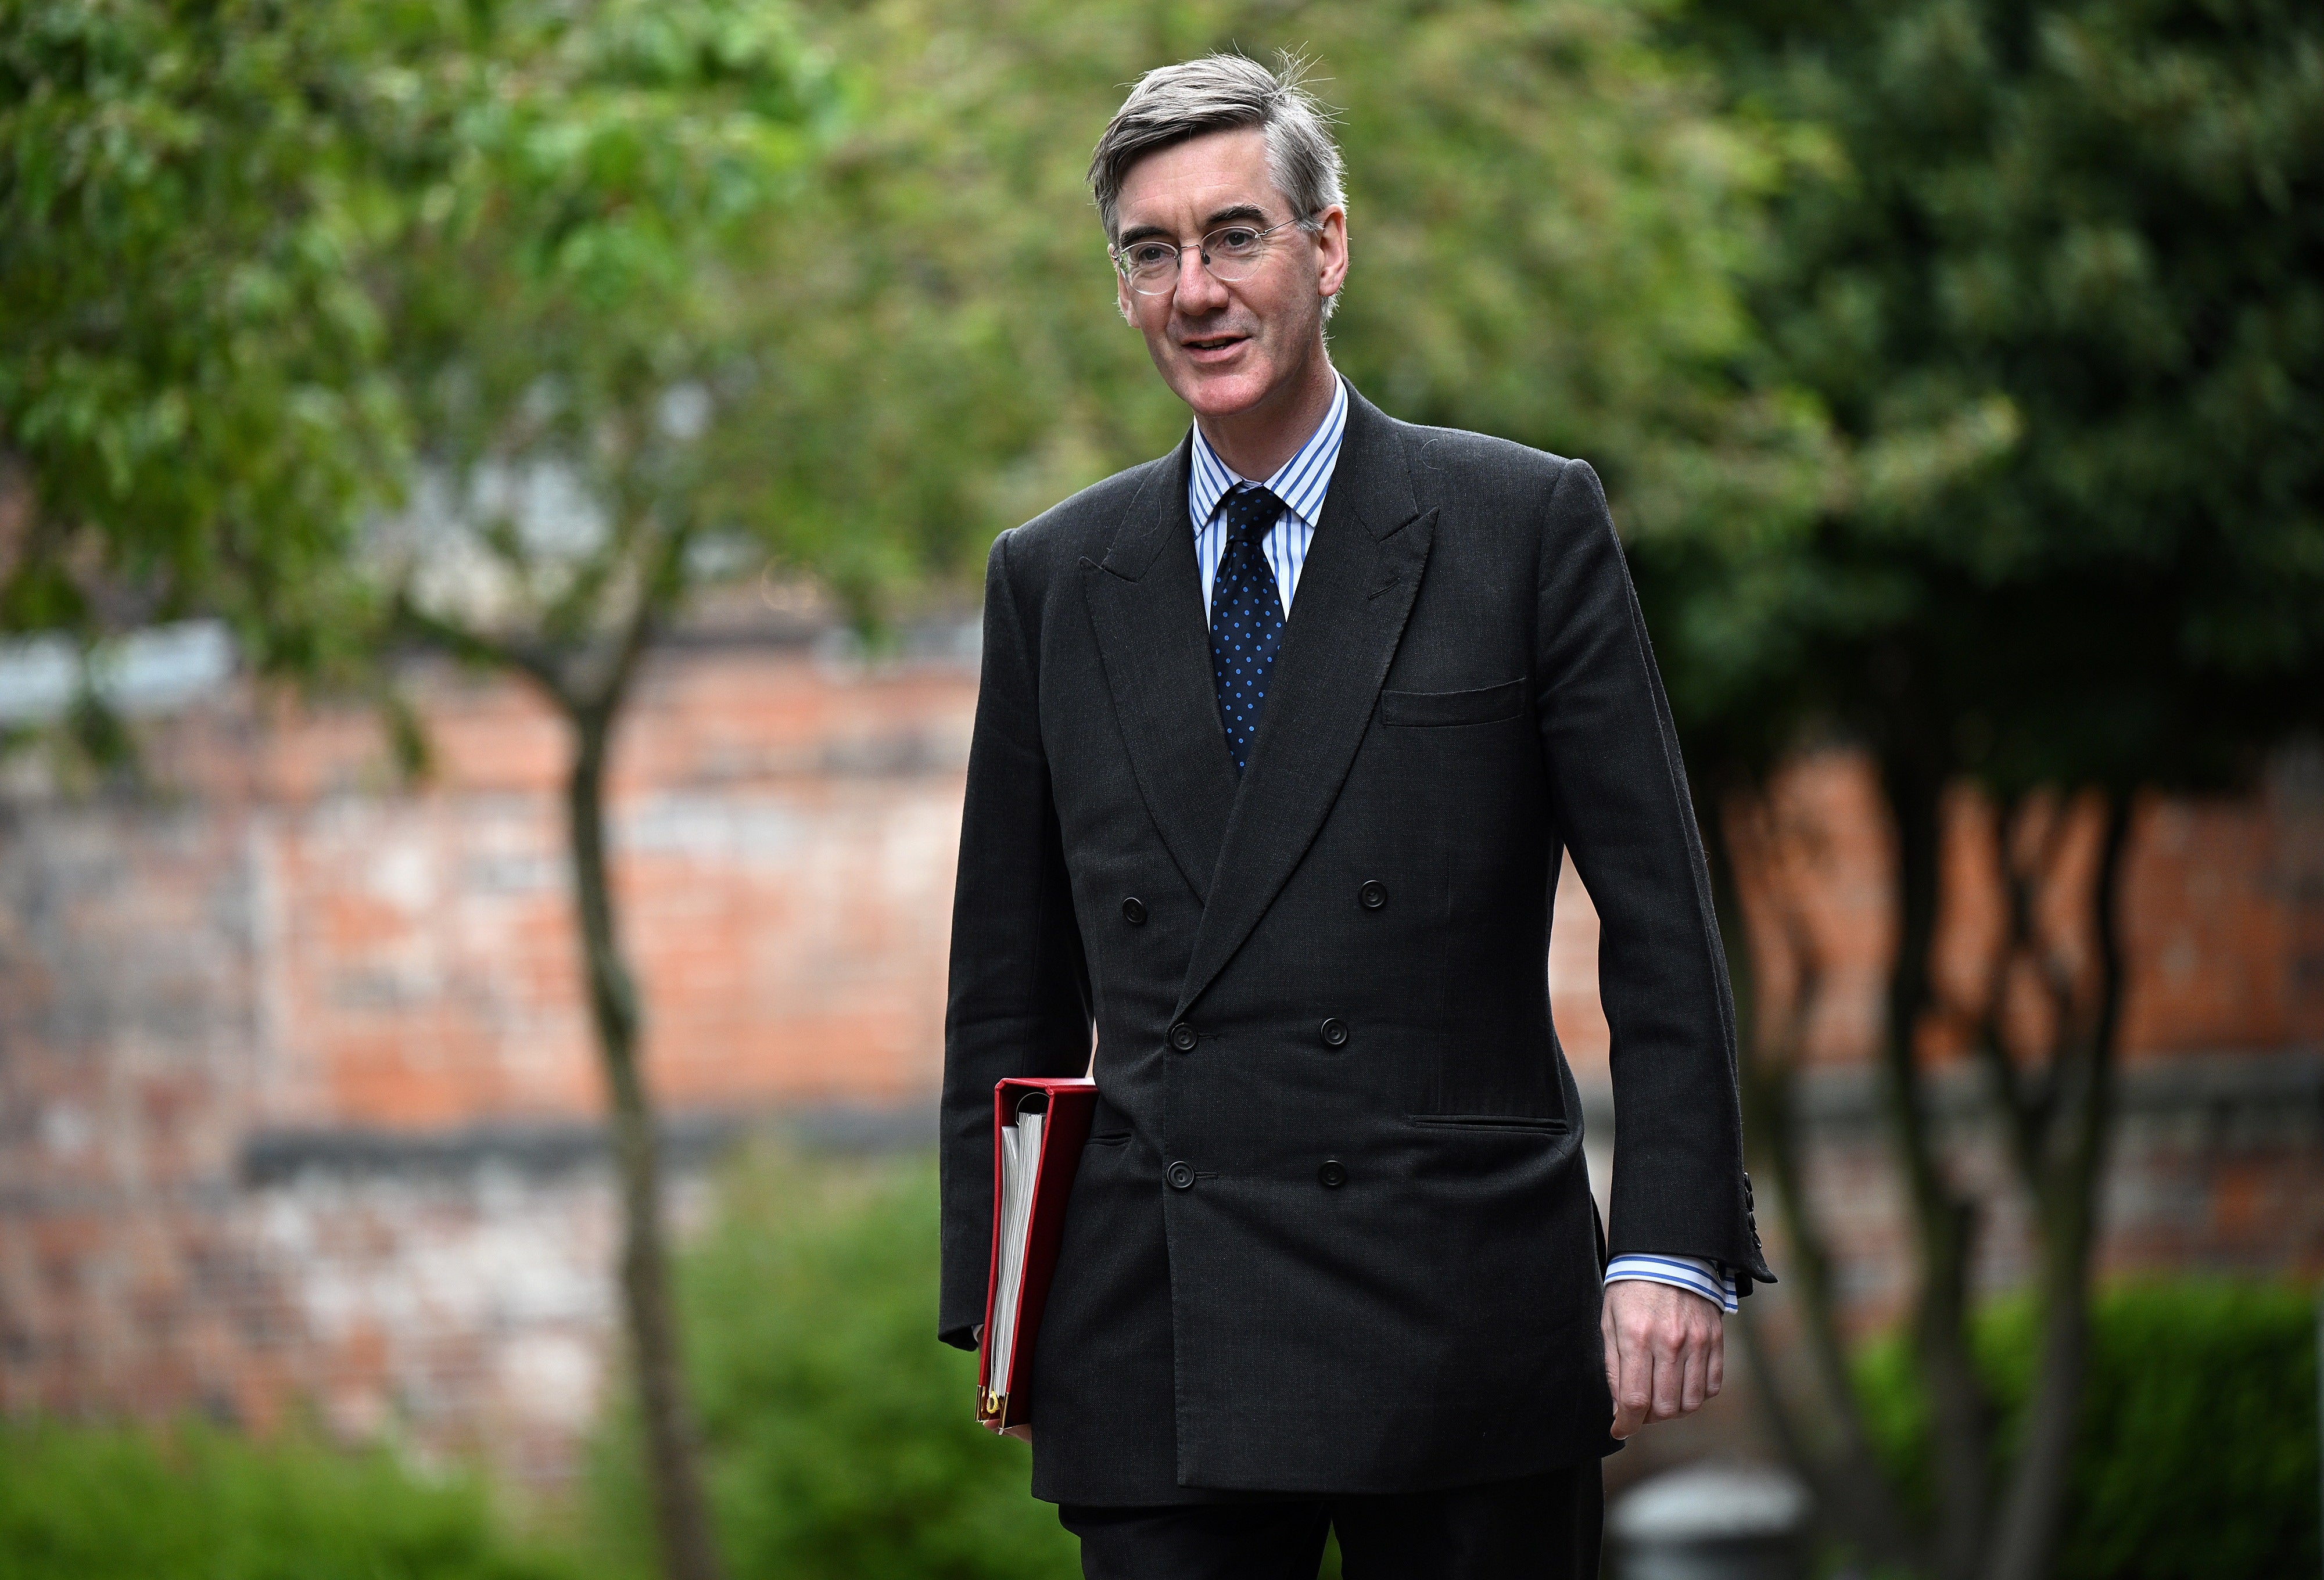 Rees-Mogg has called for a reform of UK regulations